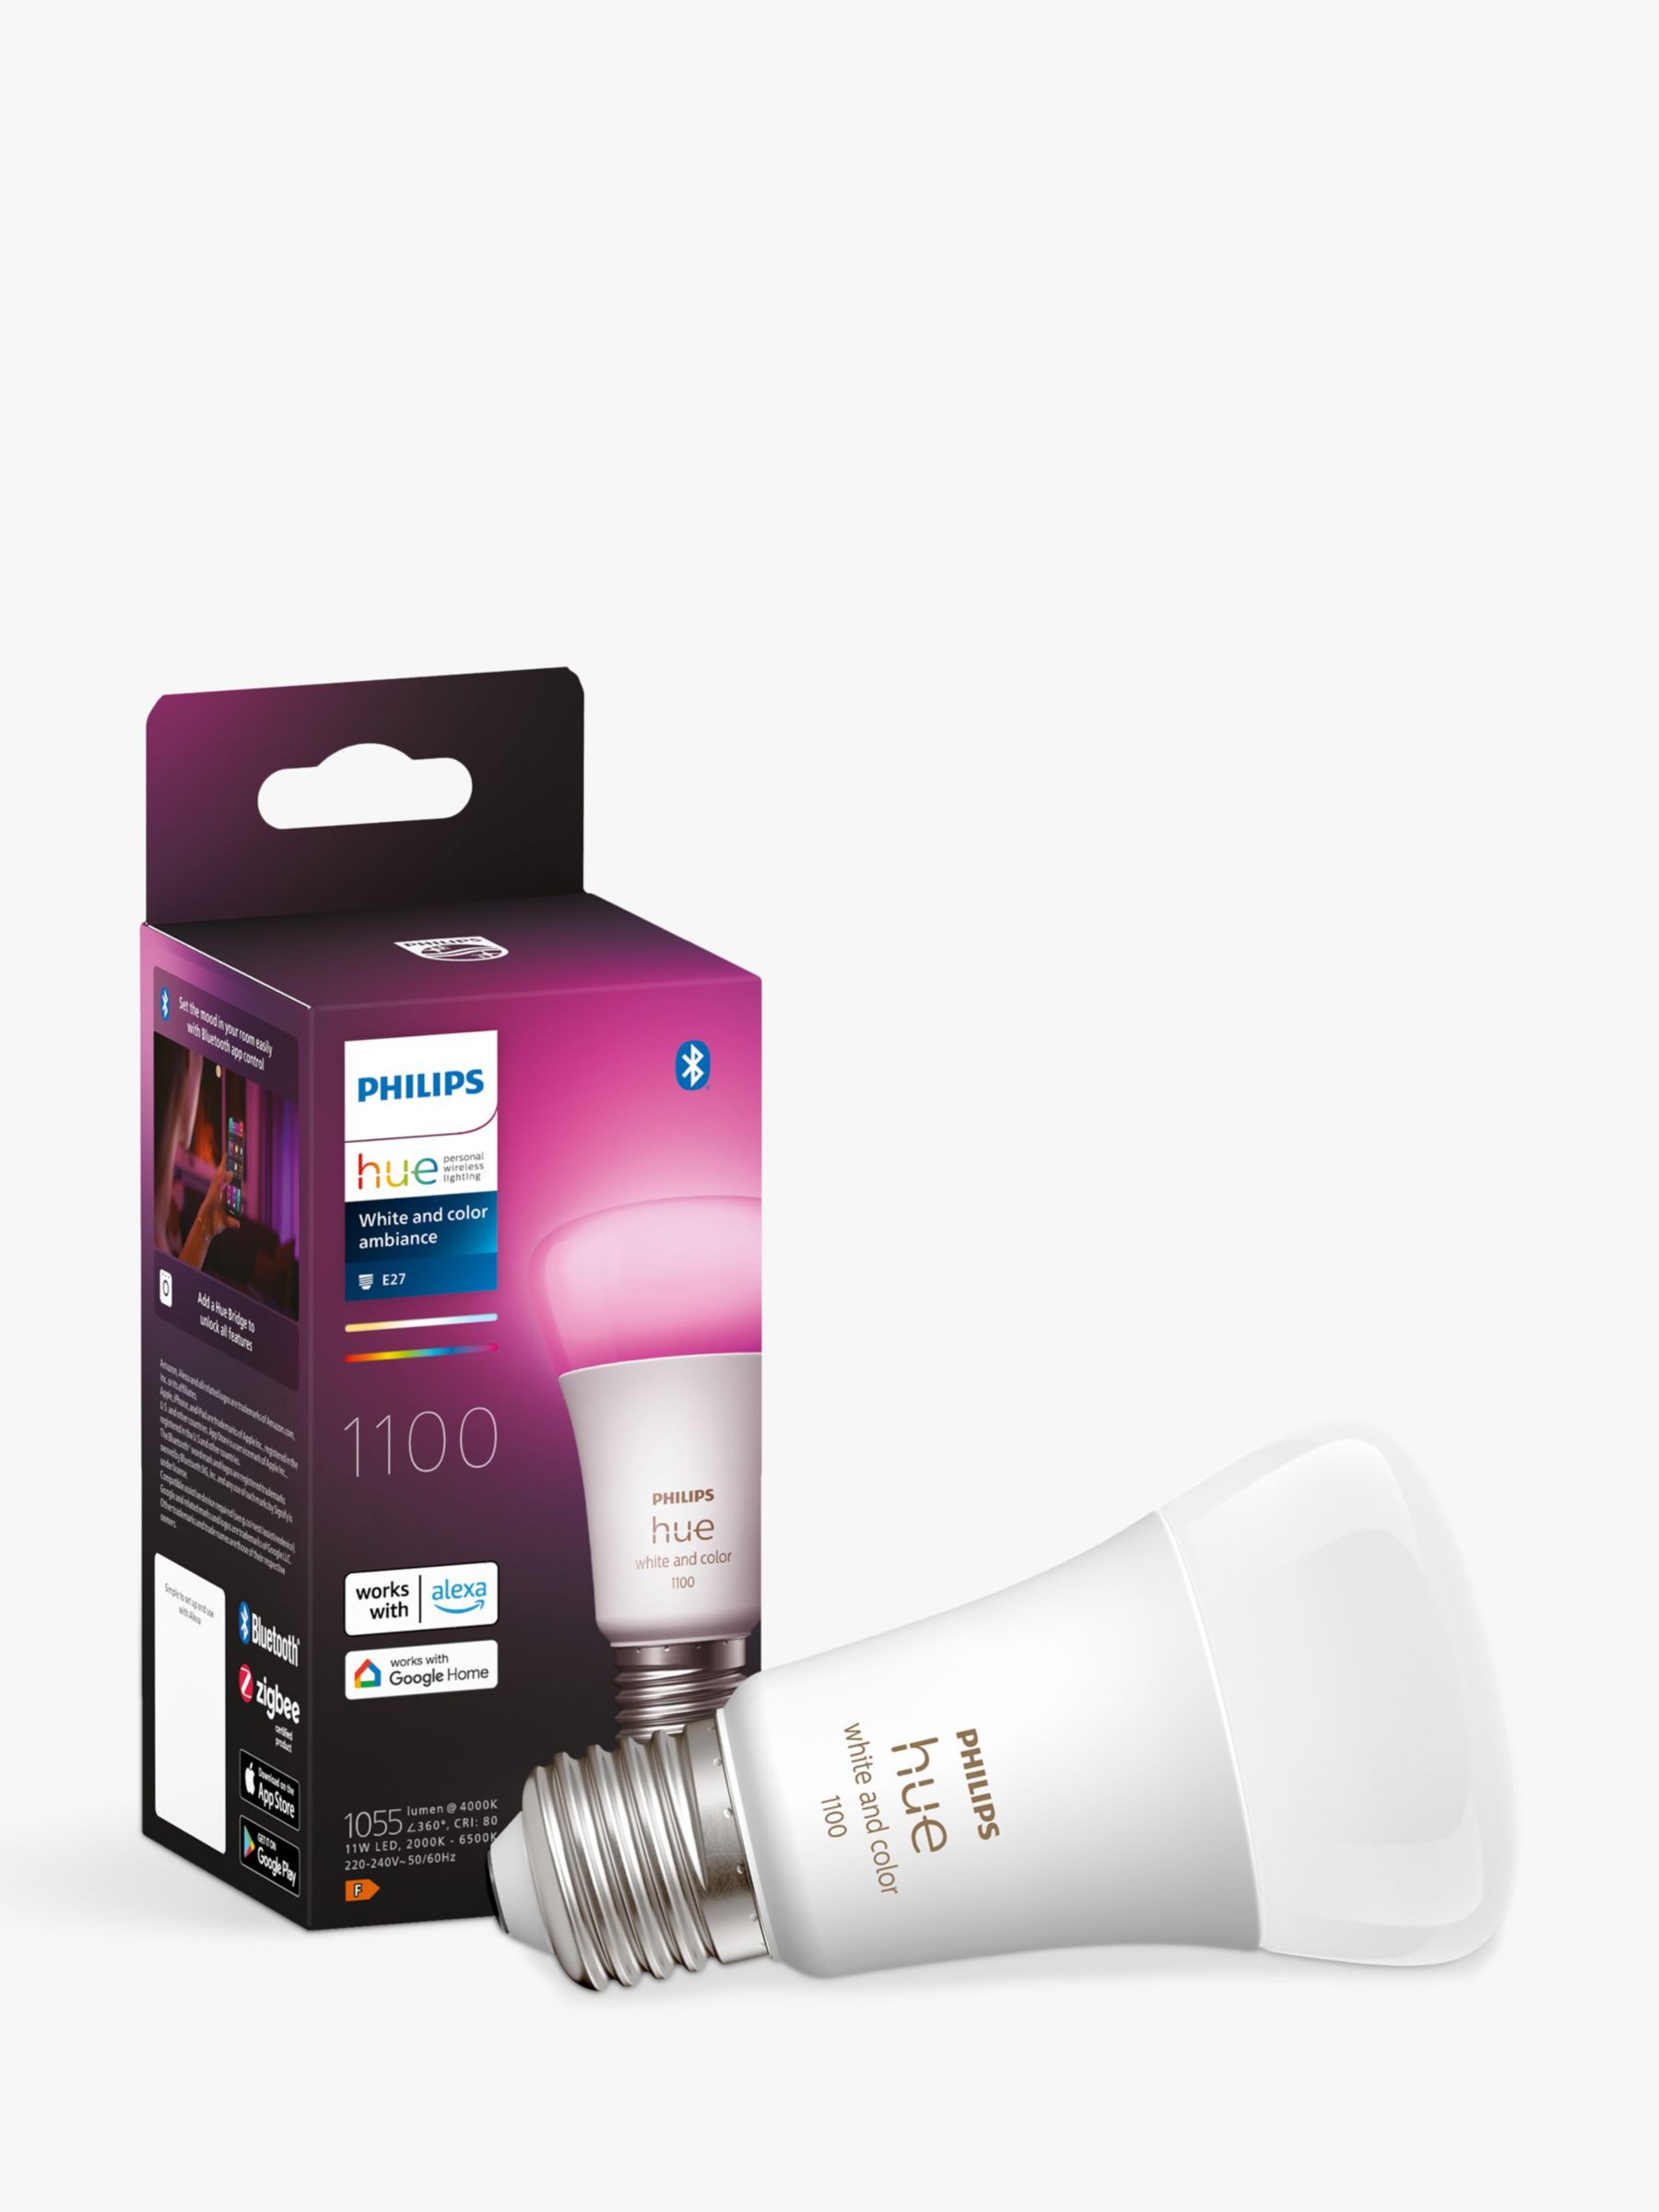 Philips Hue White and Colour Ambiance Wireless Lighting LED Starter Kit  with 2 E27 Bulbs with Bluetooth & Bridge